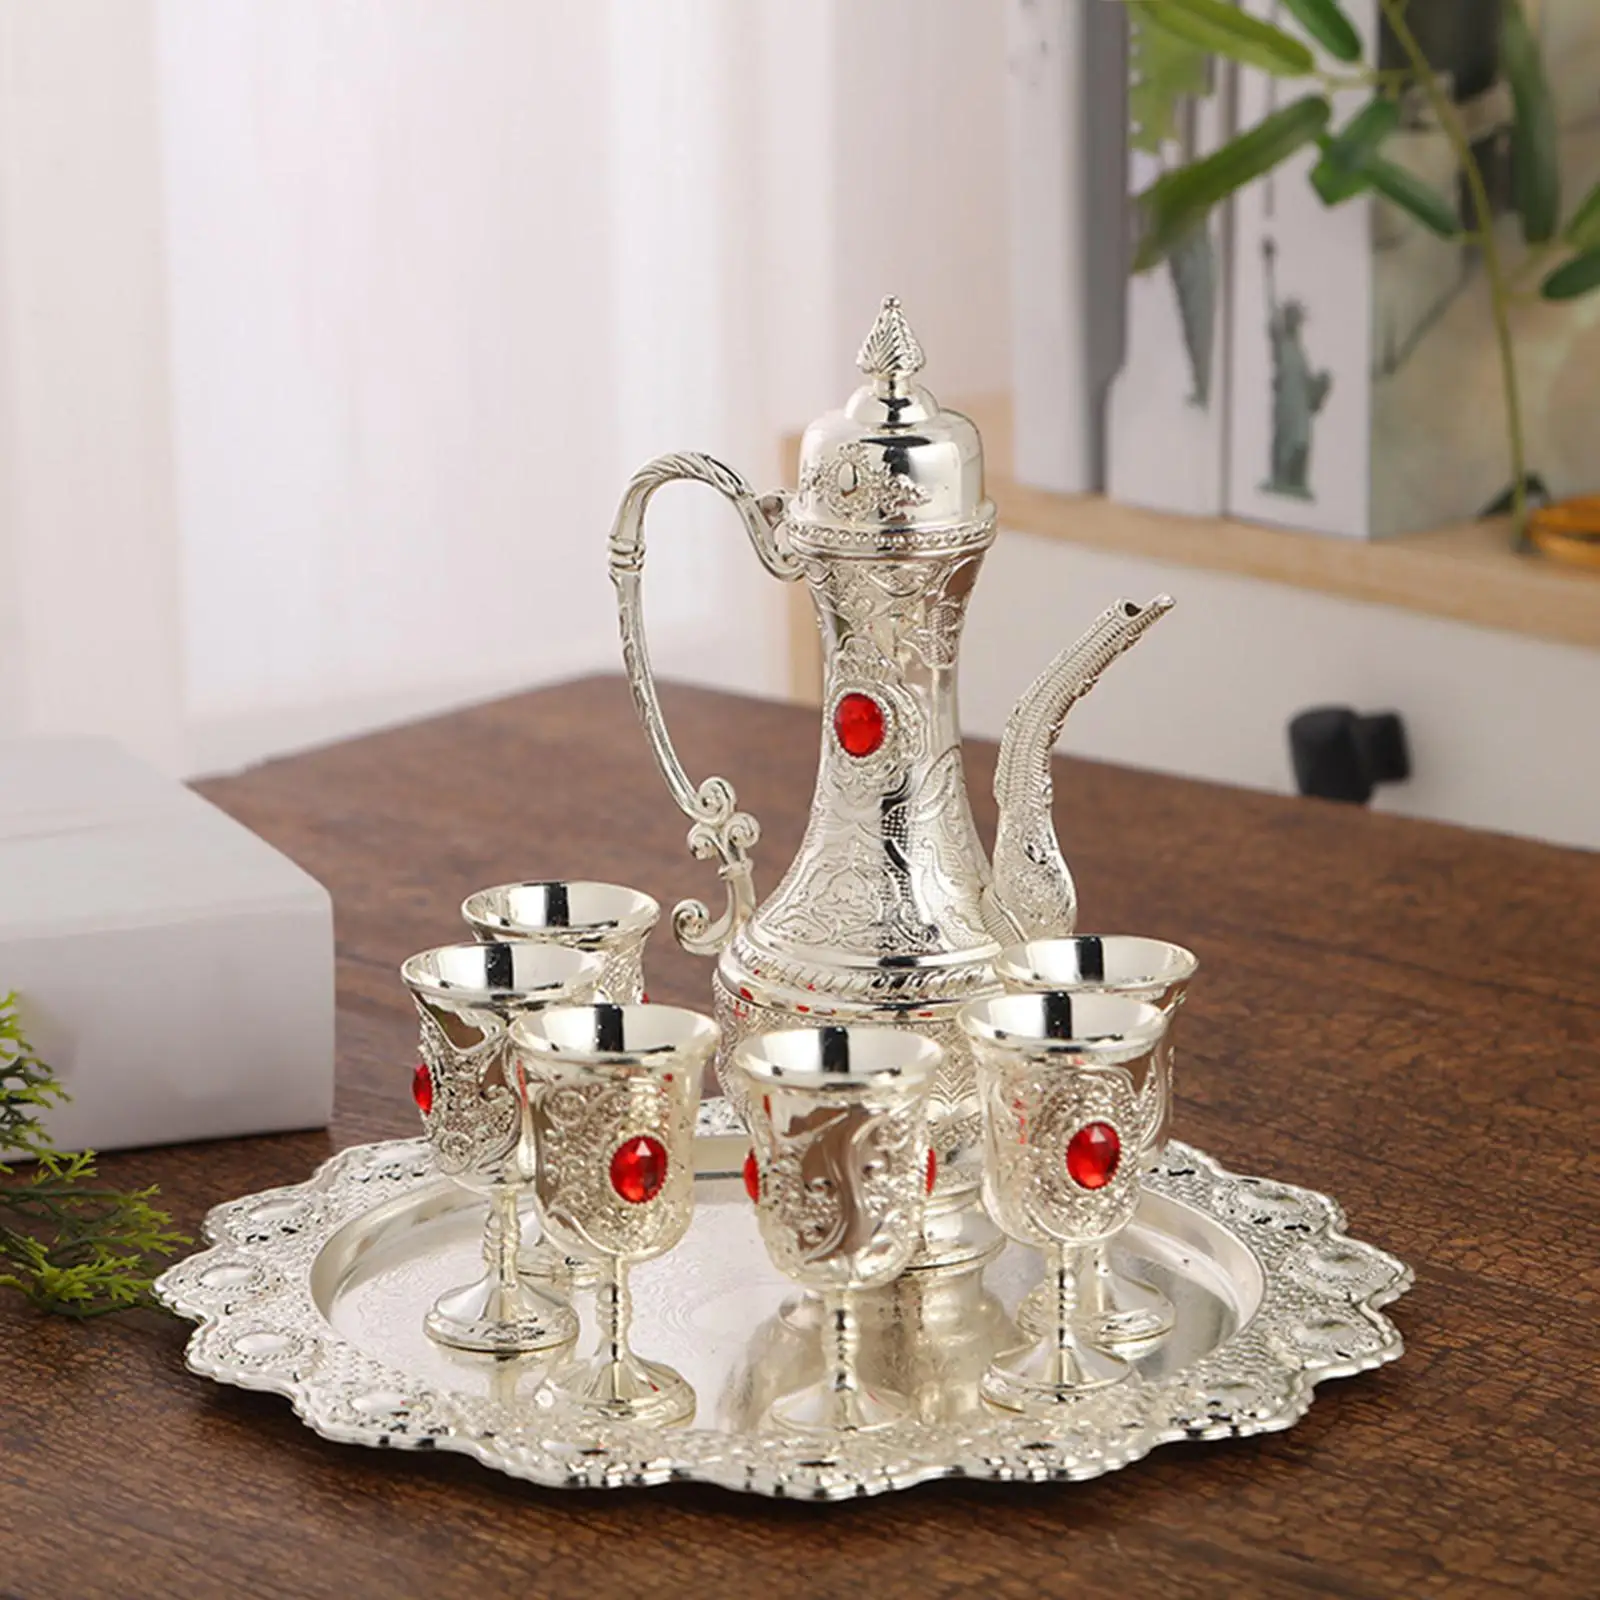 6x European Style Wine Glass Set with Storage Tray Drinking Cups Wine Liquor Decanter Set events Holiday Home Party Ornament